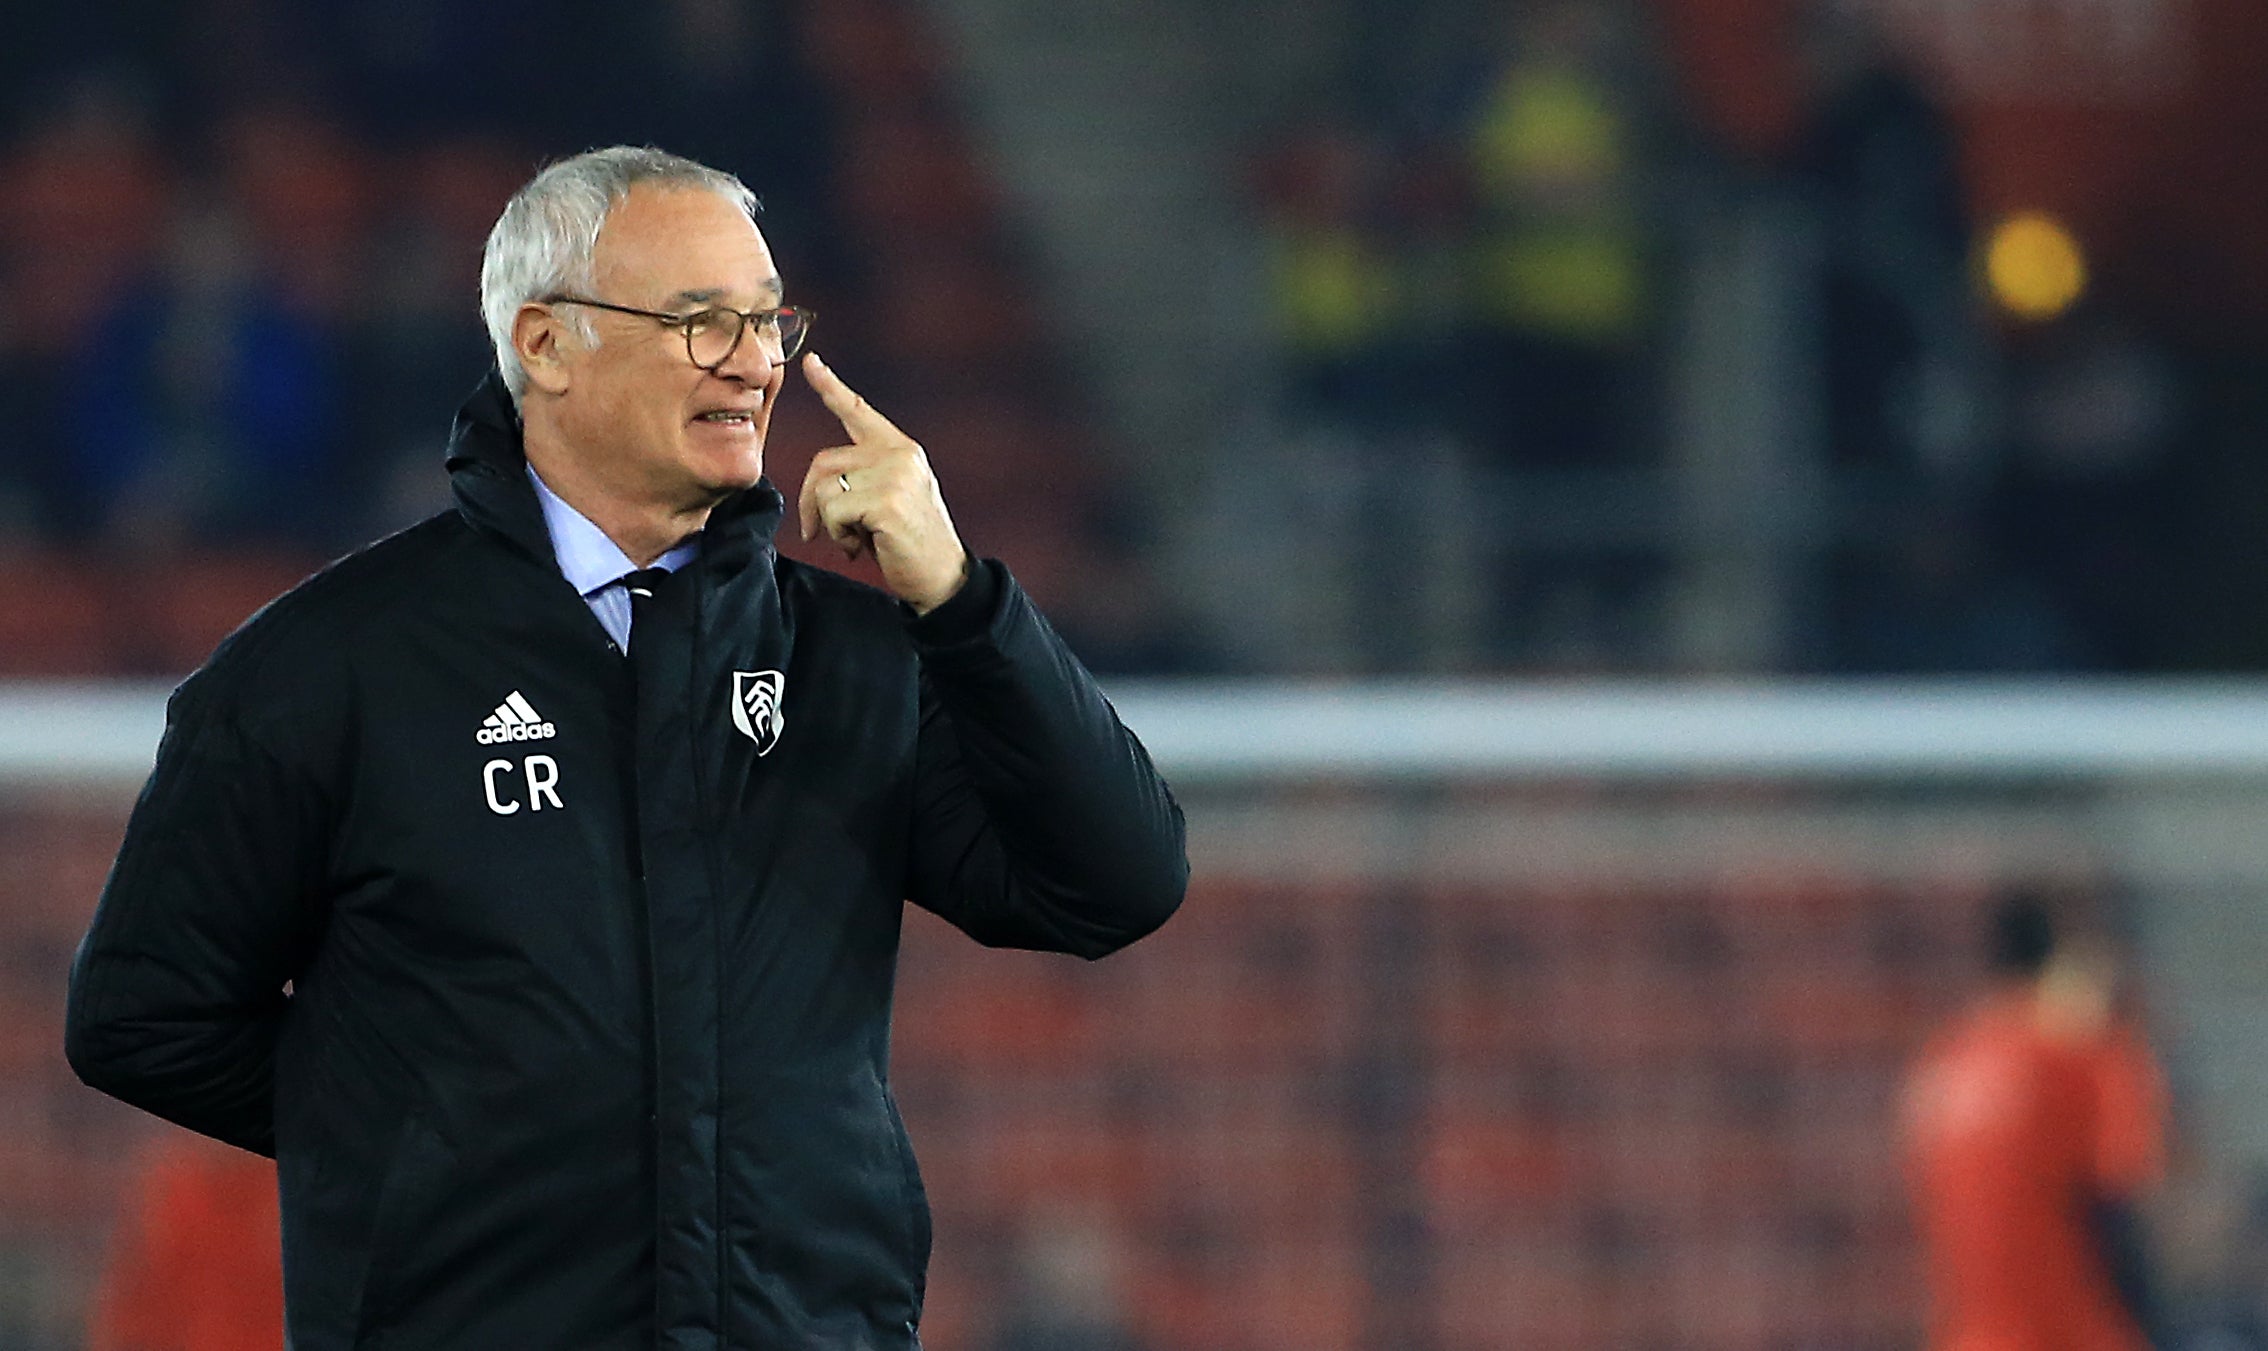 Claudio Ranieri, pictured, is expected to take over as manager at Watford (Mark Kerton/PA)